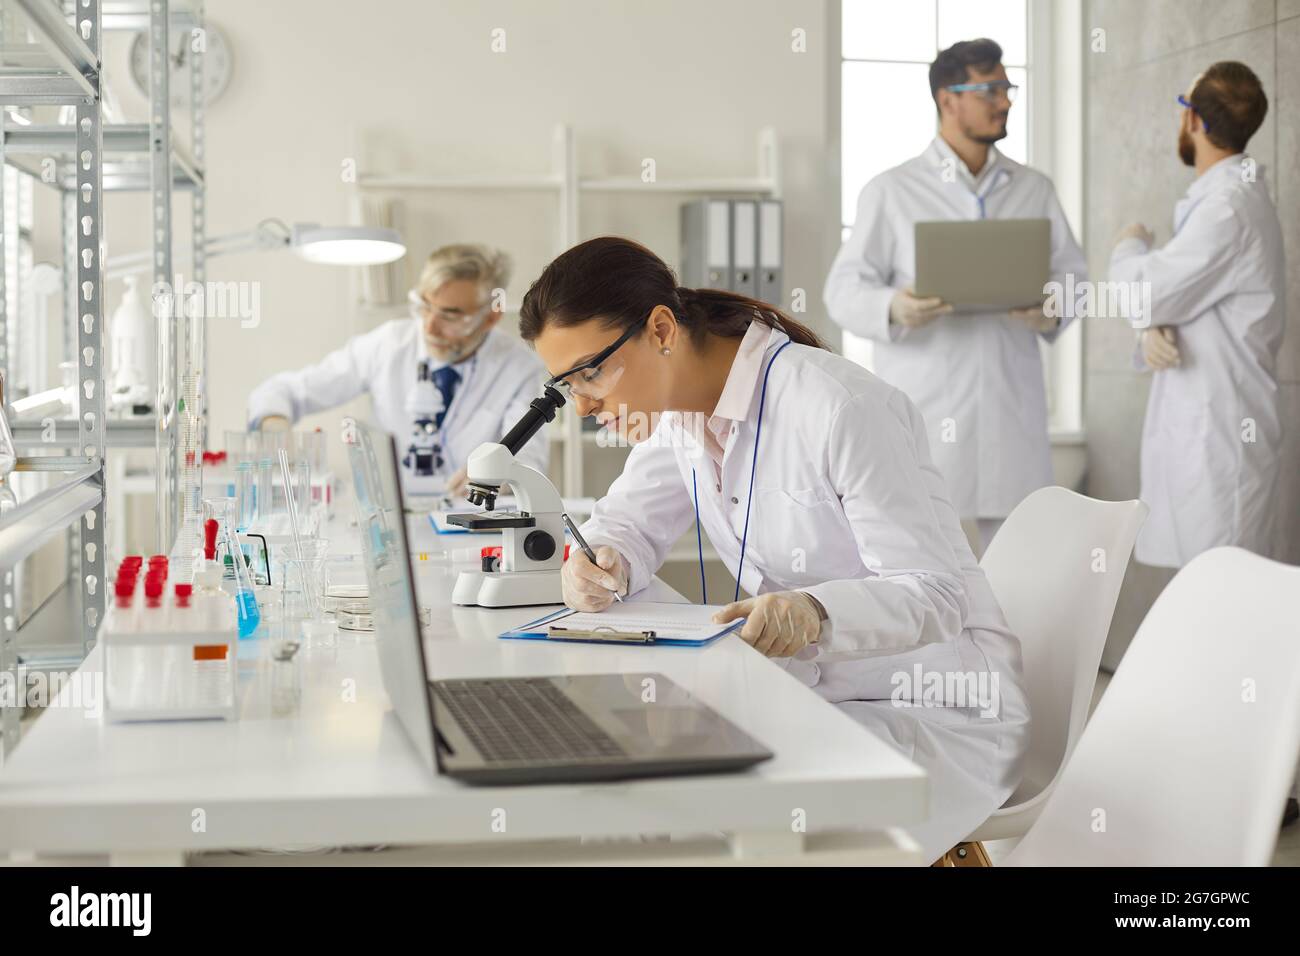 Young woman lab worker working with microscope making notes on clipboard Stock Photo